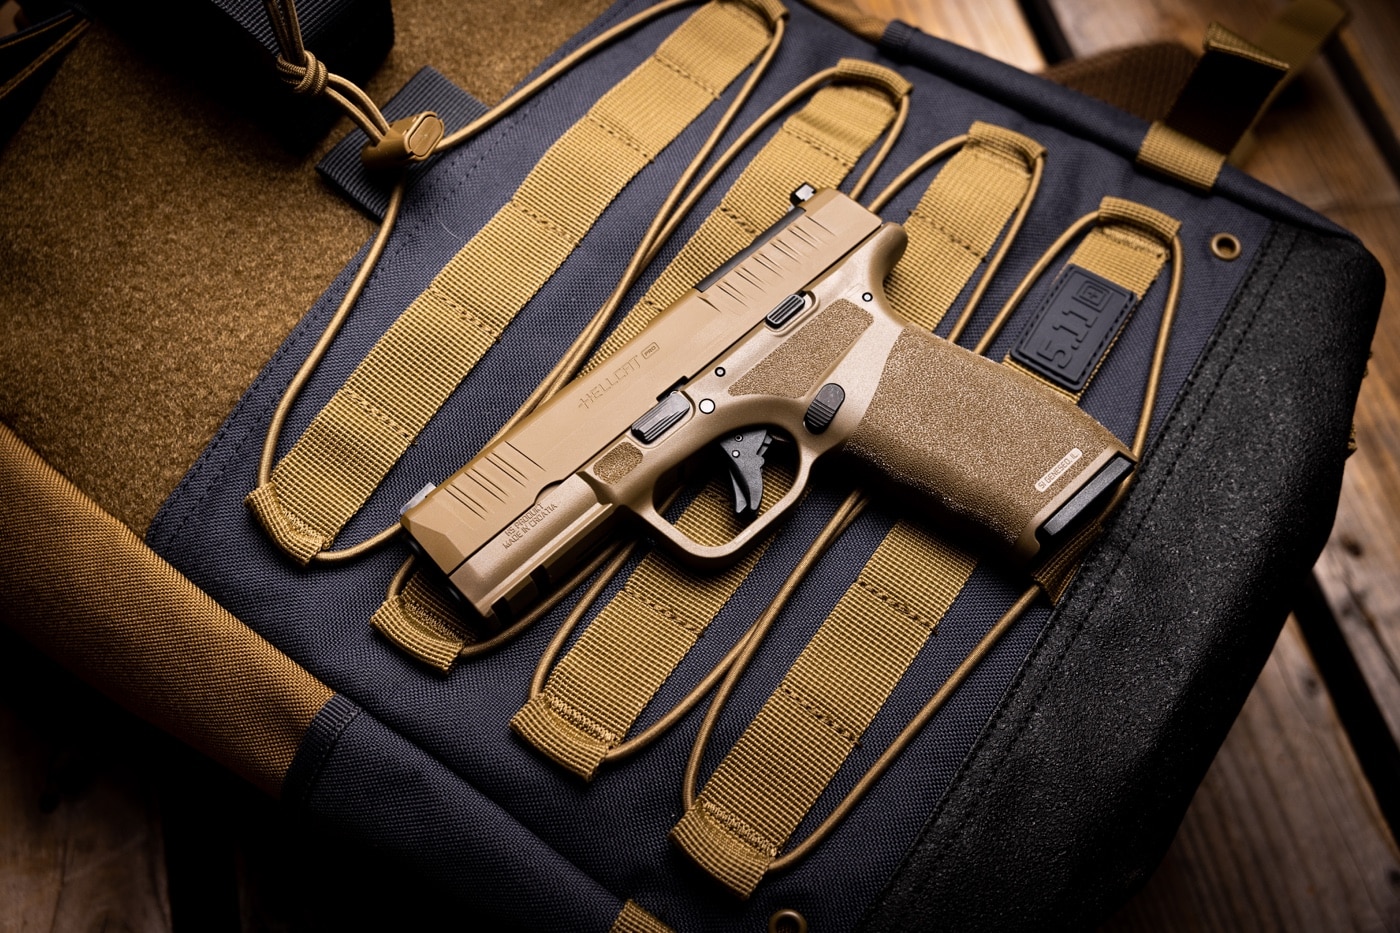 In the photo we see the Hellcat Pro with the Desert FDE finish. It has all of the standard features common to the line including the Adaptive Grip Texture and u-dot sights.